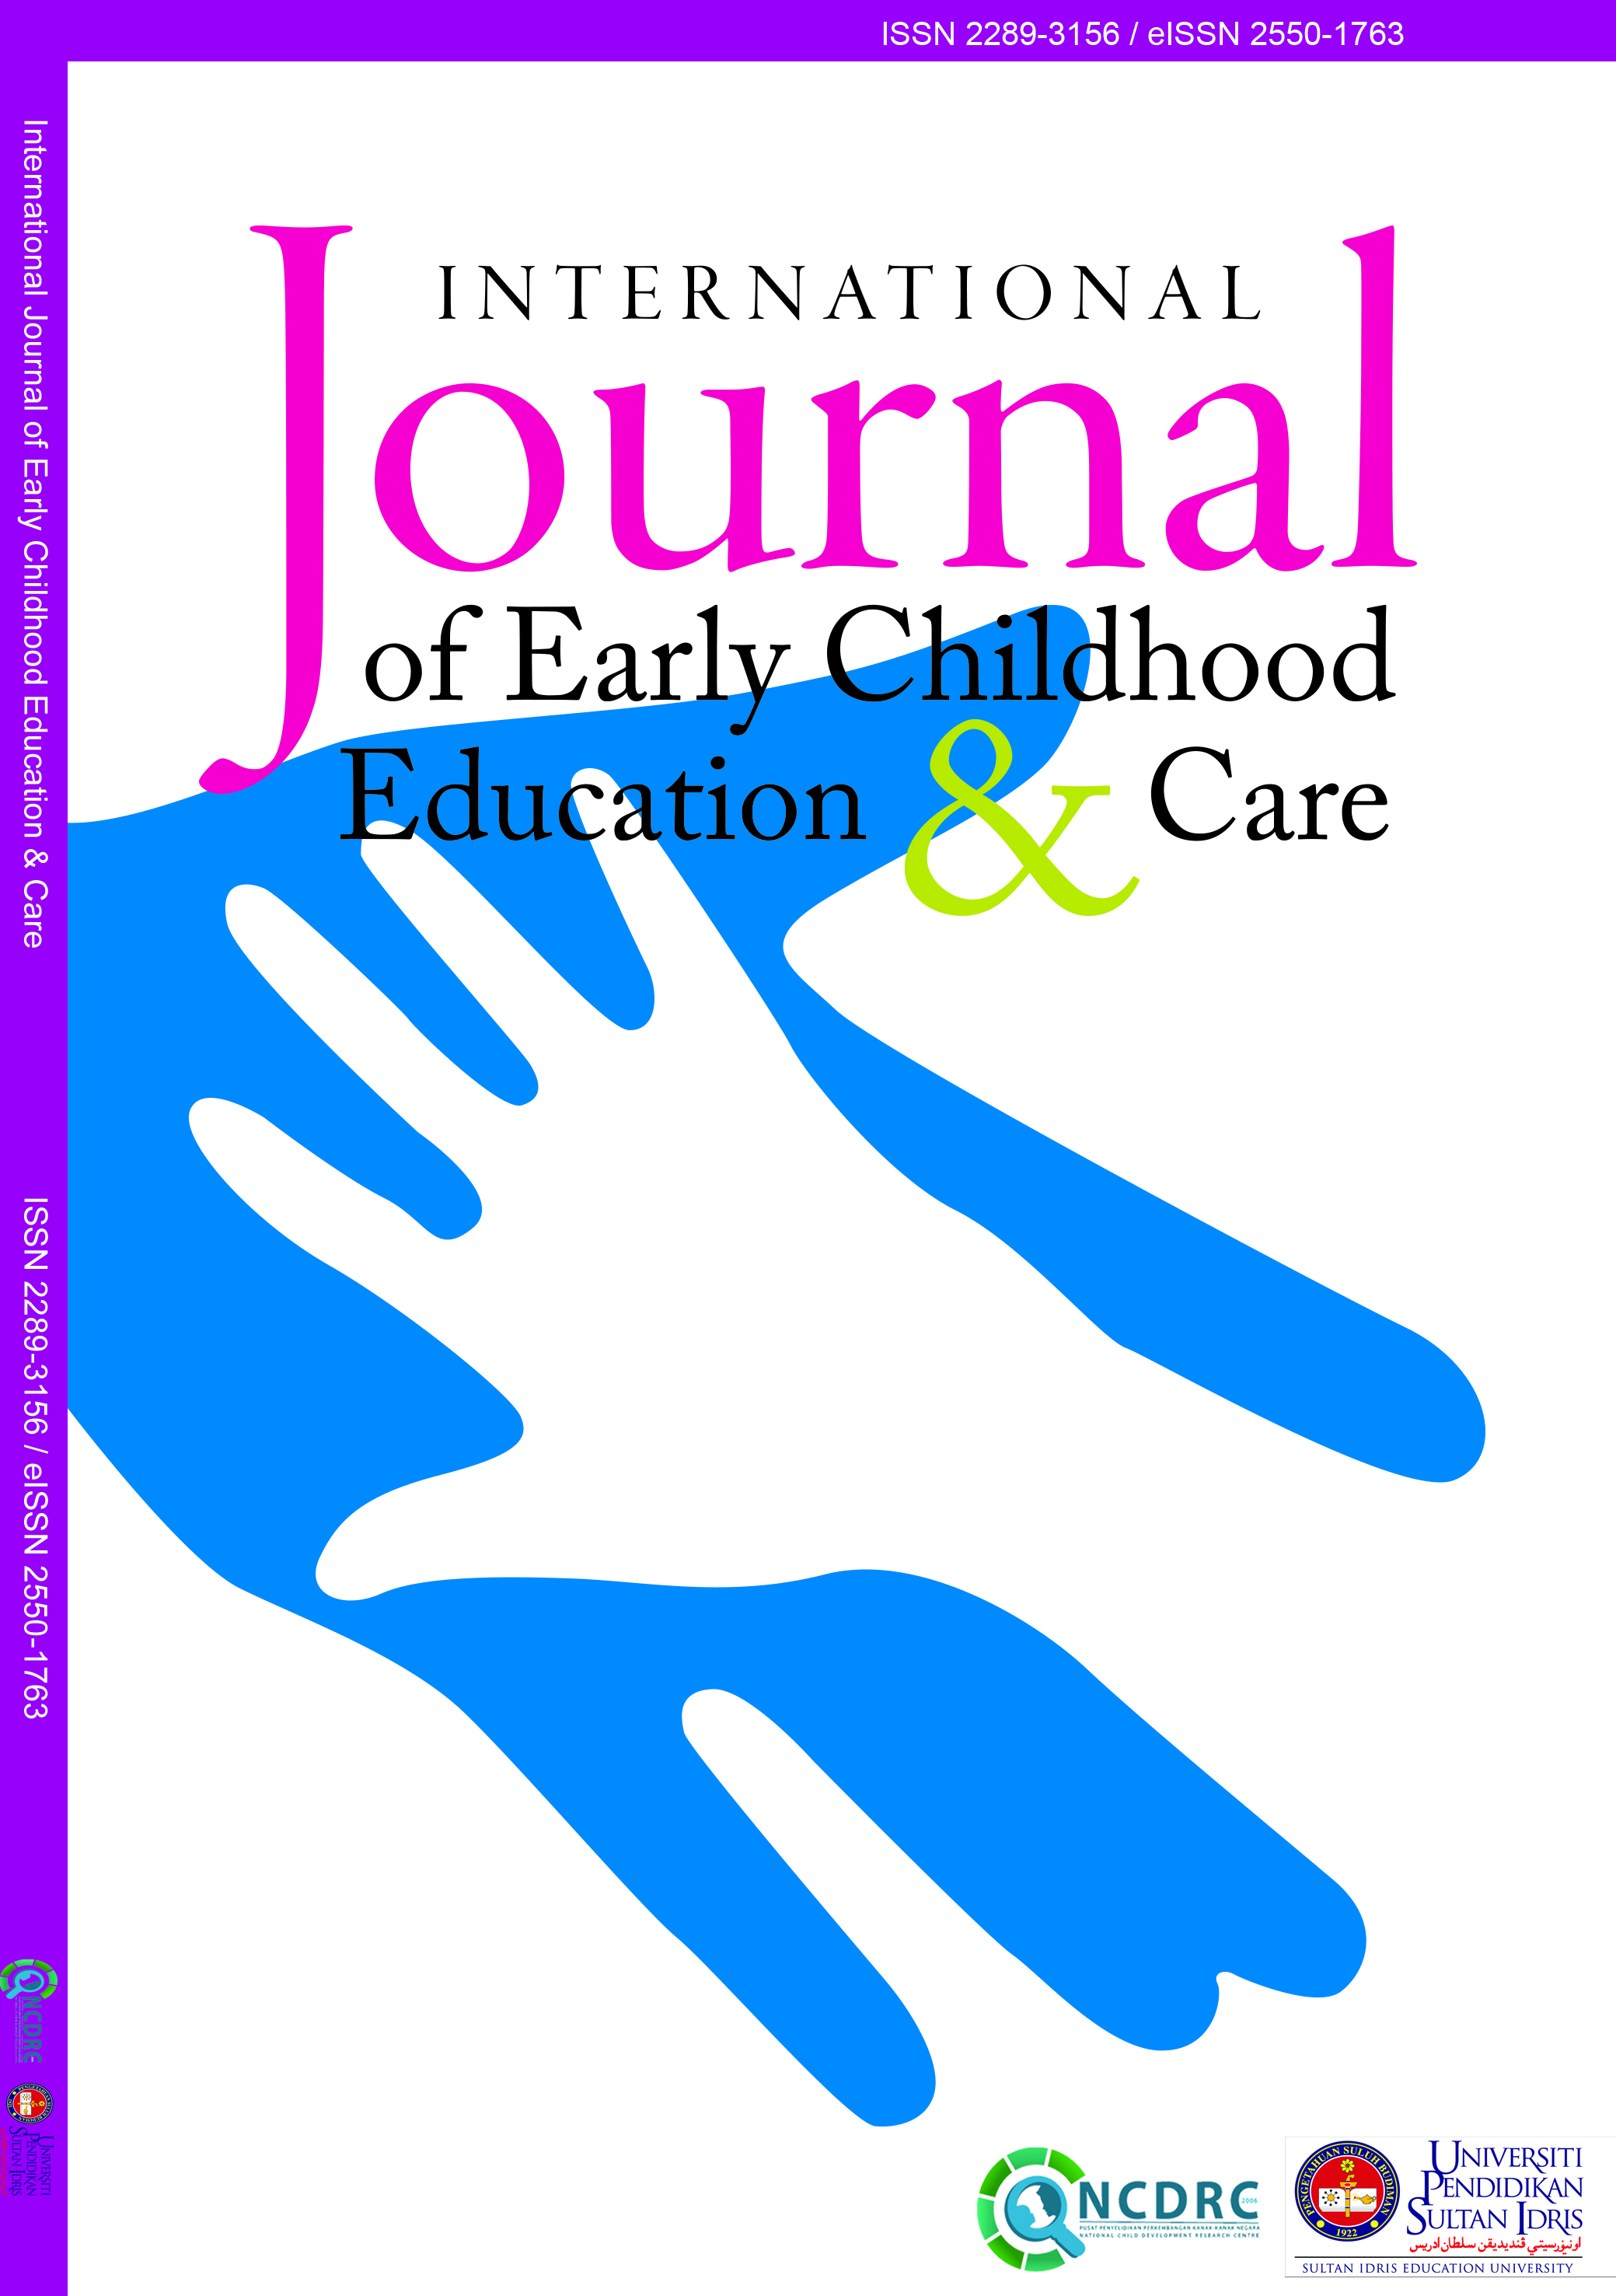 					View Vol. 2 (2013): International Journal of Early Childhood Education and Care
				